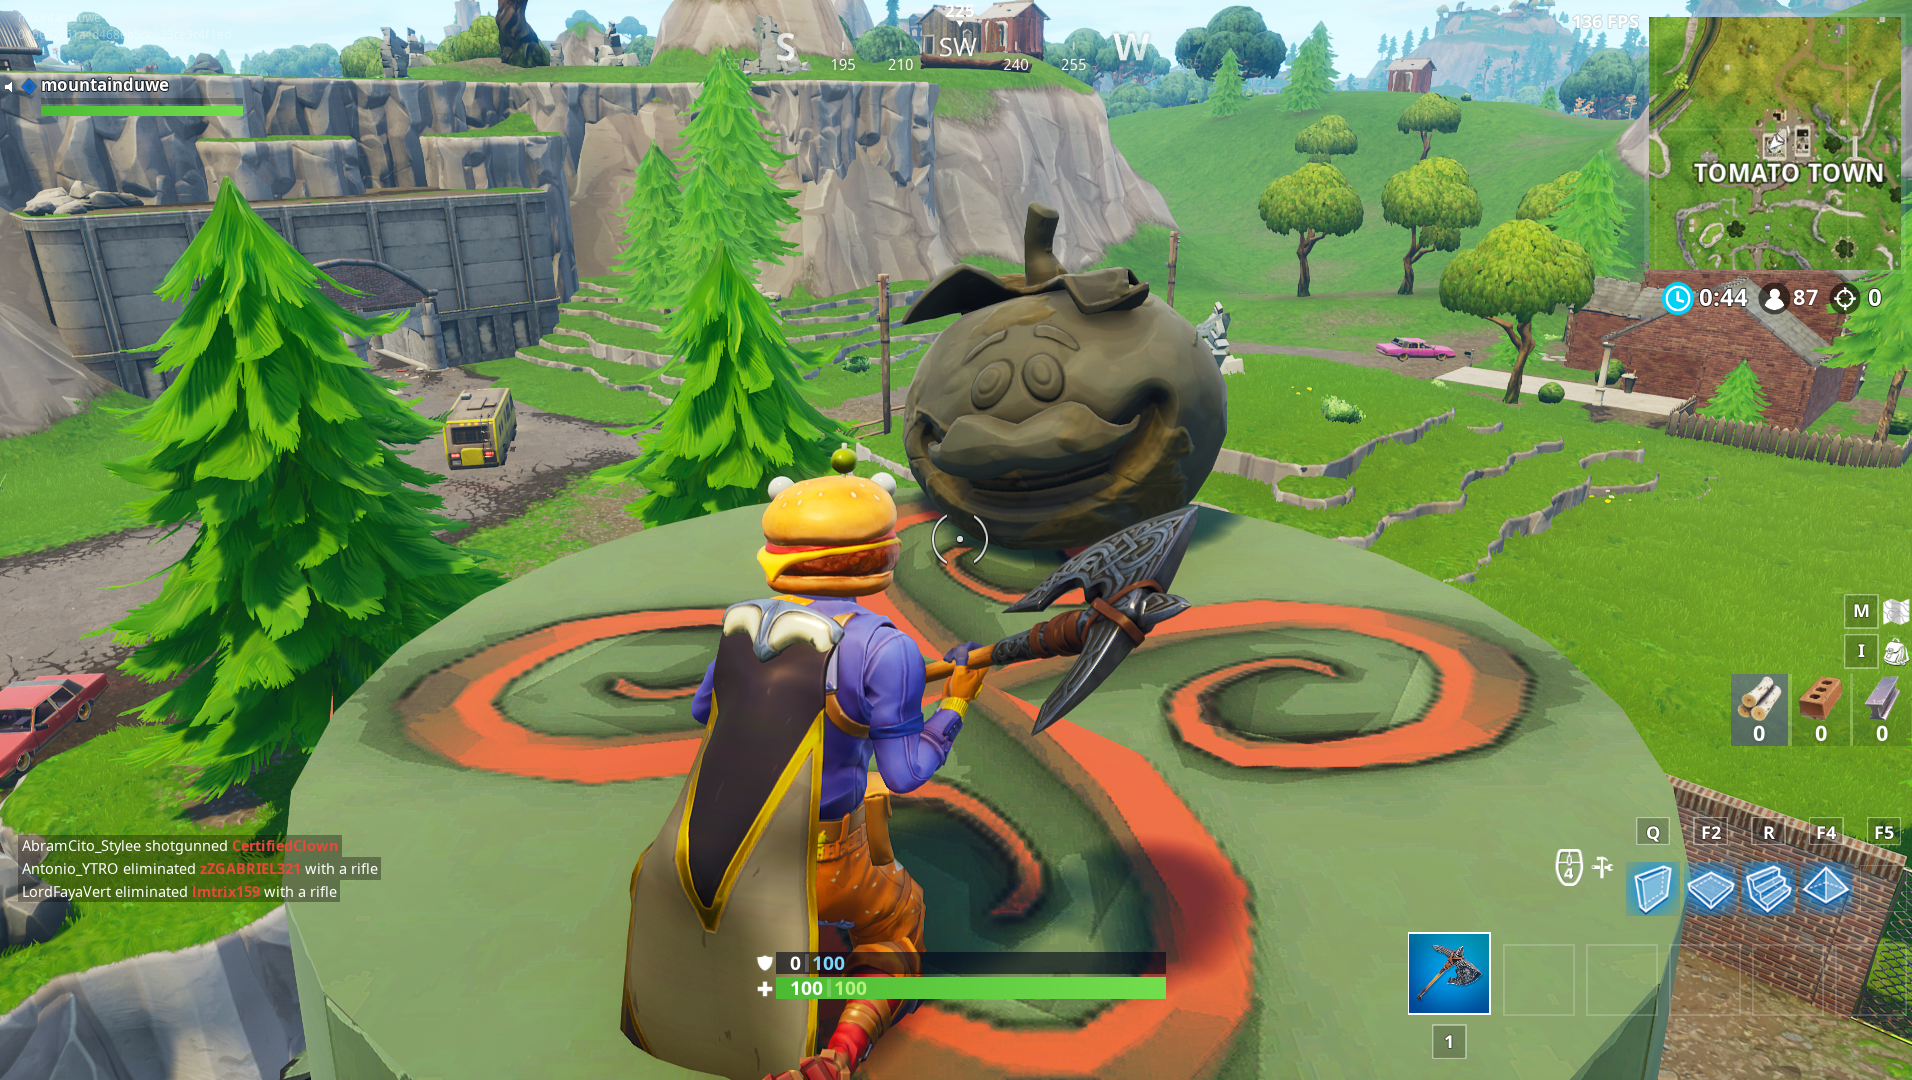 Is Fortnite S New Tomato Head Teasing An Event With The Wailing - is fortnite s new tomato head teasing an event with the wailing woods bunker